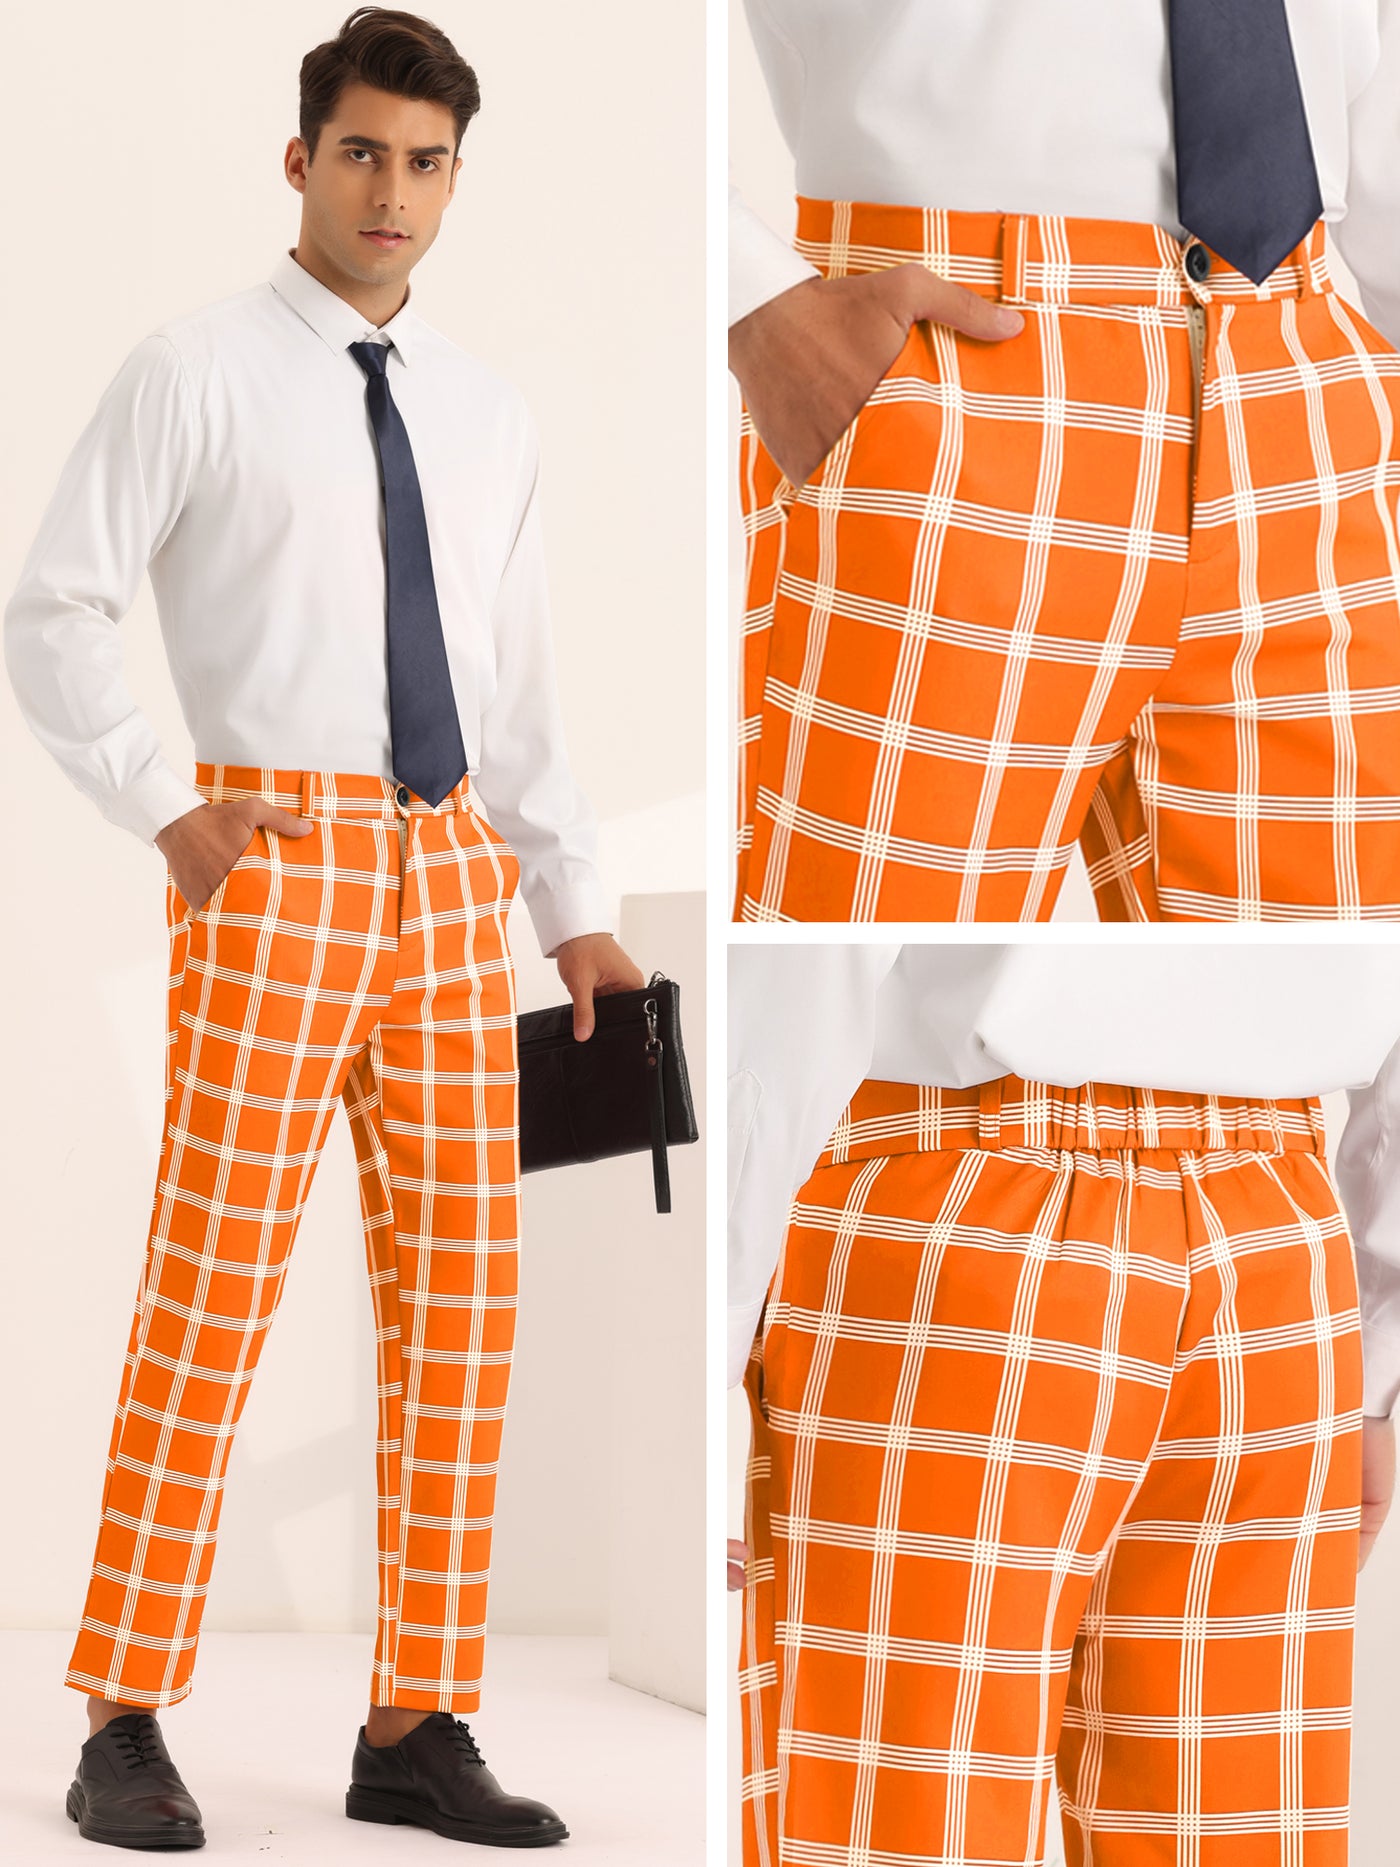 Bublédon Plaid Pattern Pants for Men's Slim Fit Flat Front Work Office Checked Trousers